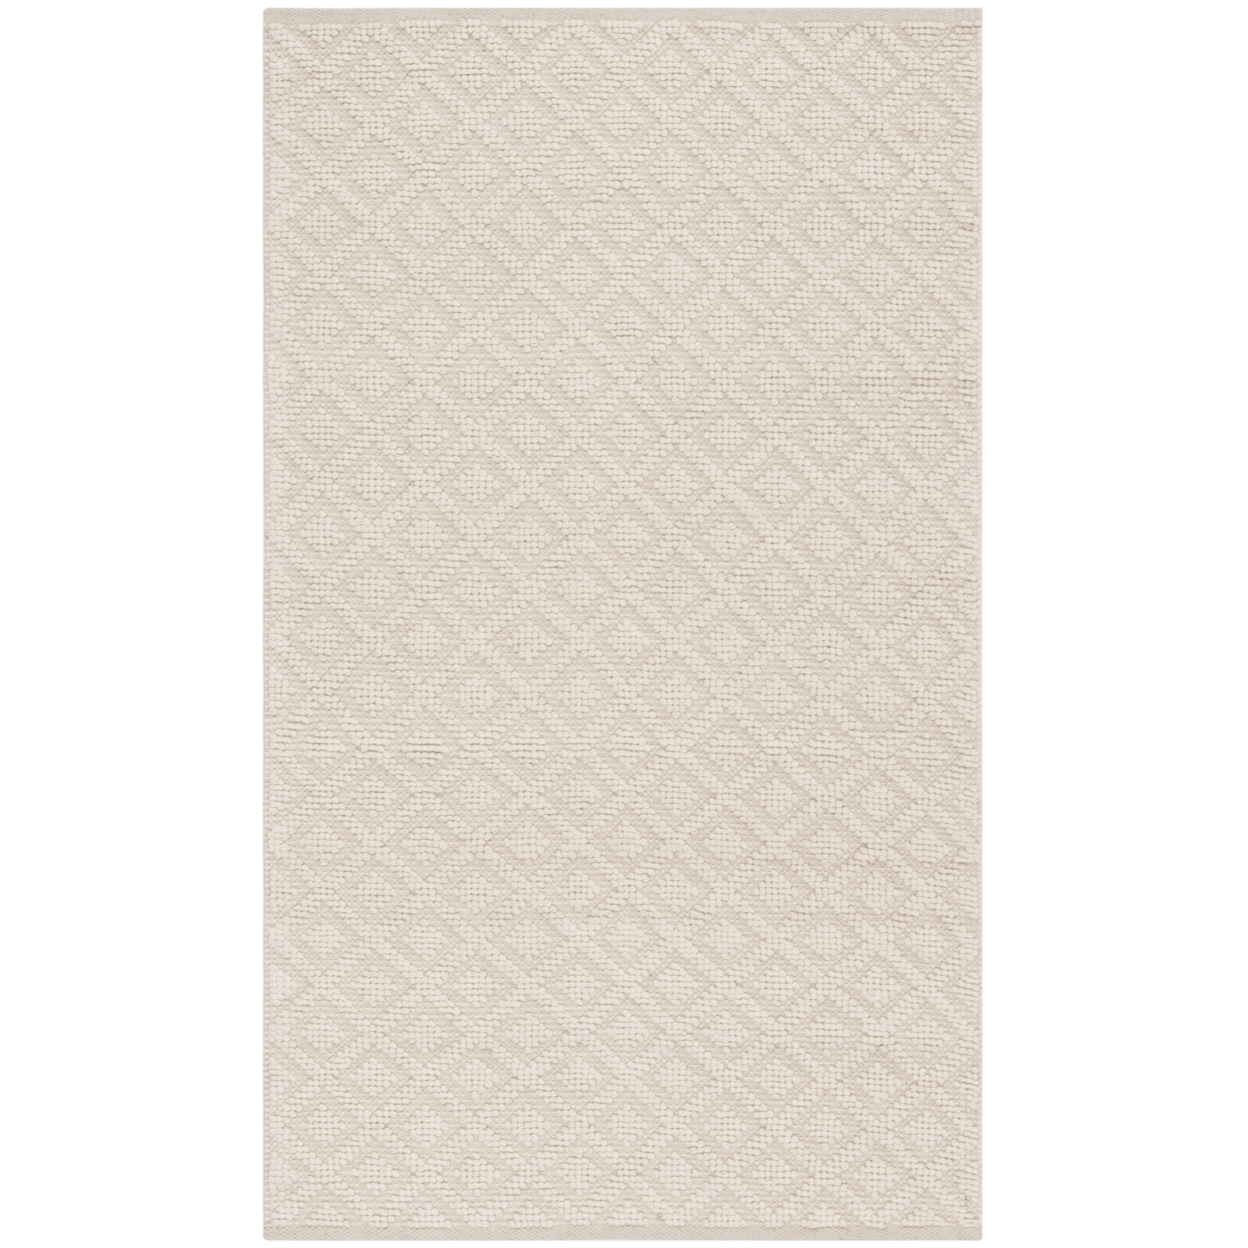 SAFAVIEH Vermont Collection VRM104A Handwoven Ivory Rug - 2' 3 X 20'